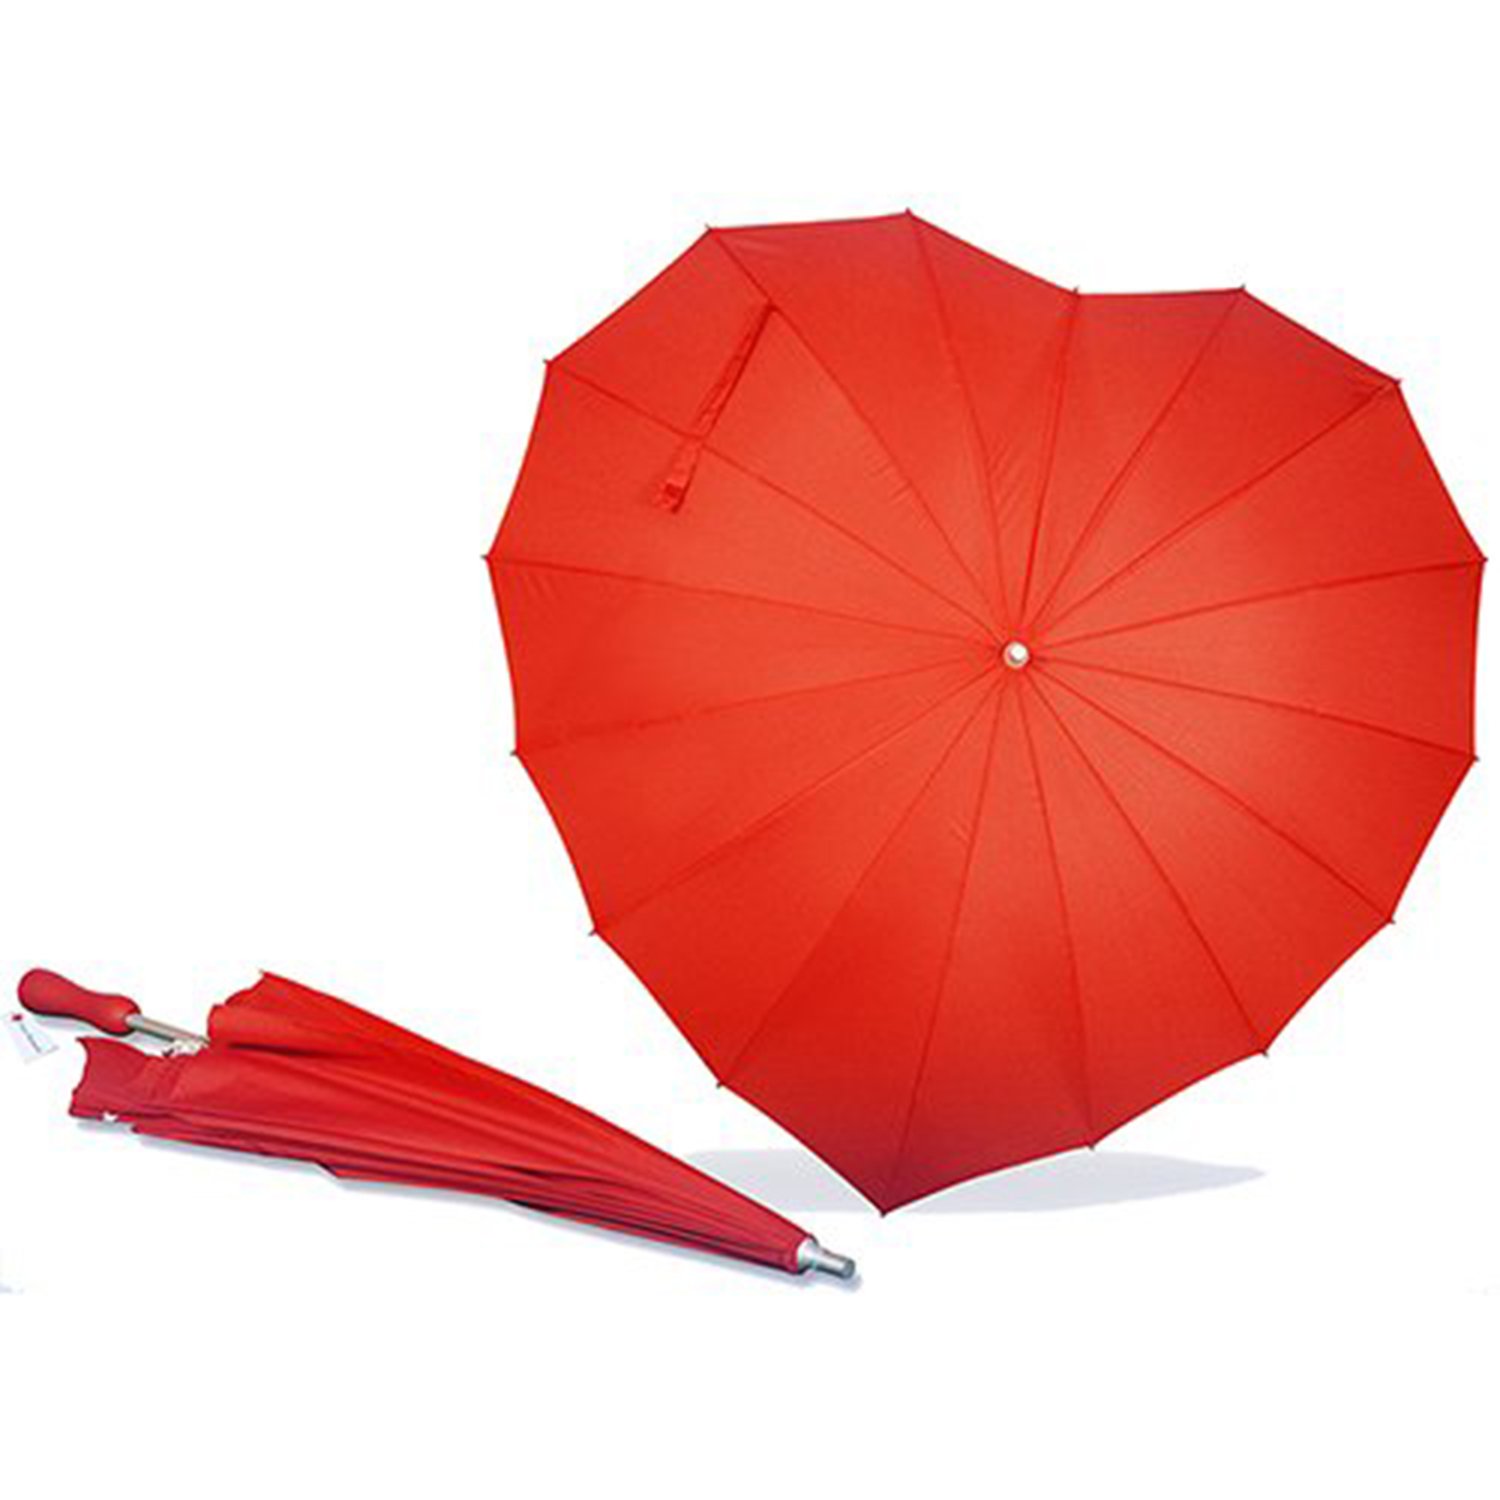 product shot of a heart shaped red wedding umbrella for rain